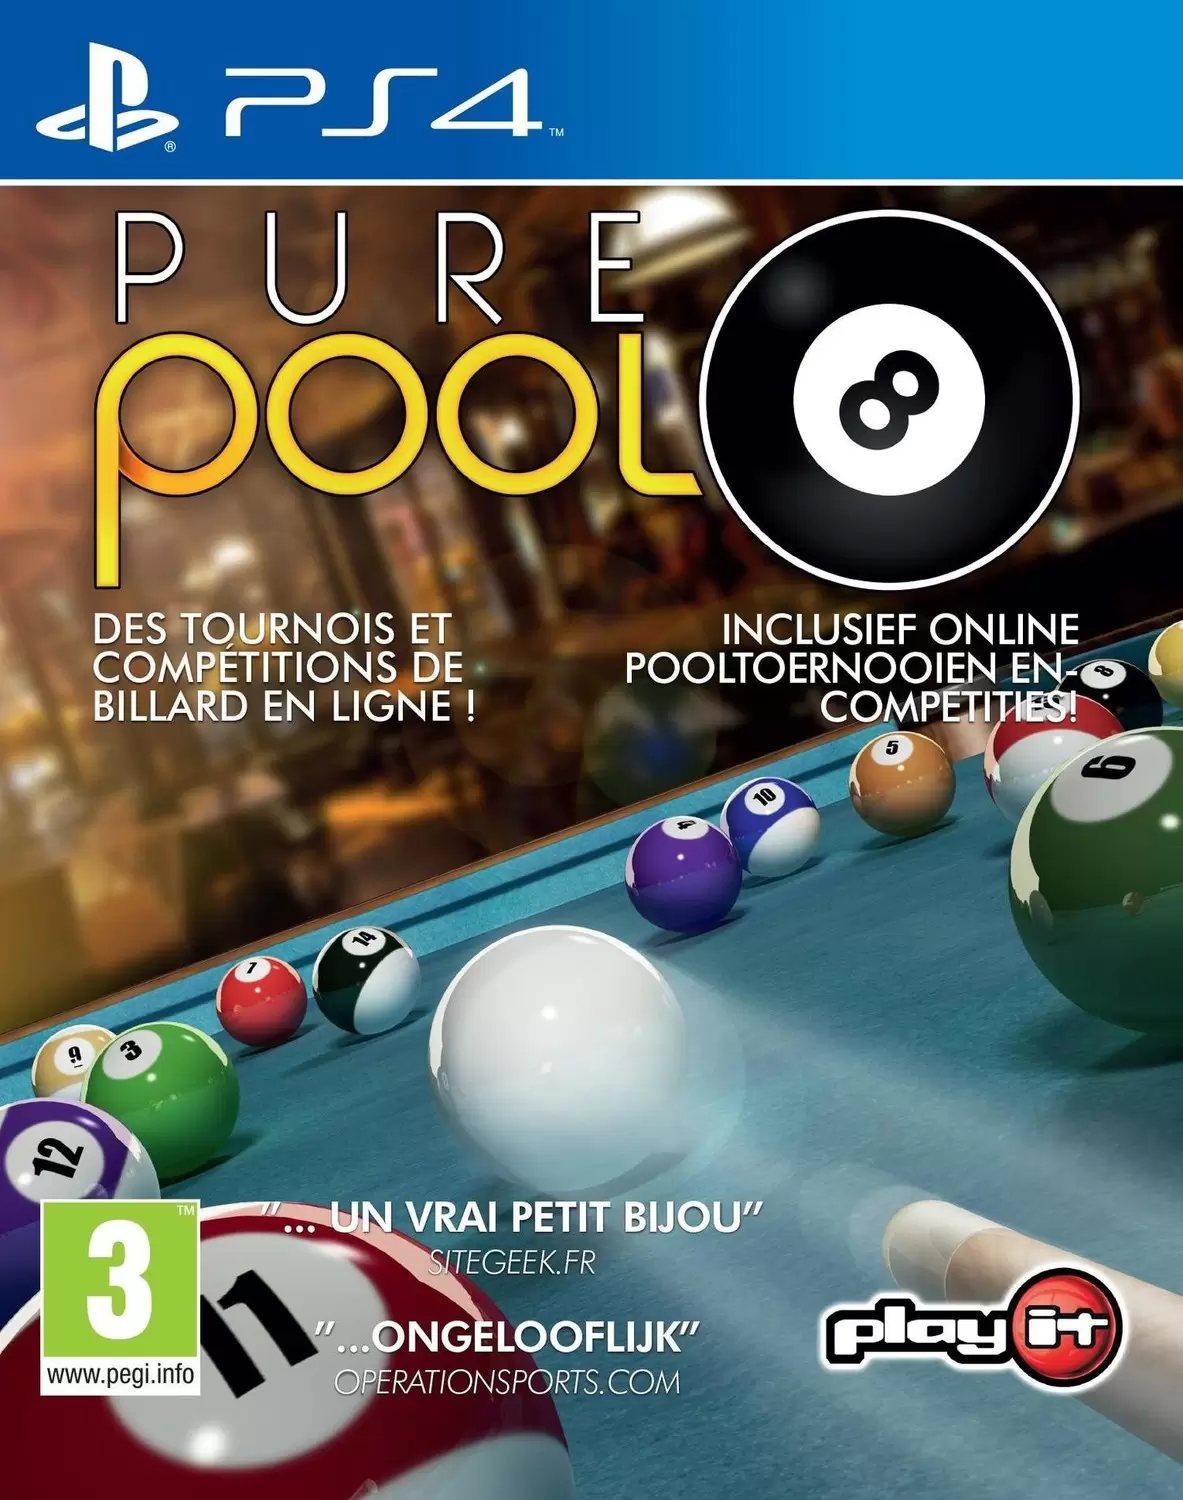 PS4 Games - Pure Pool